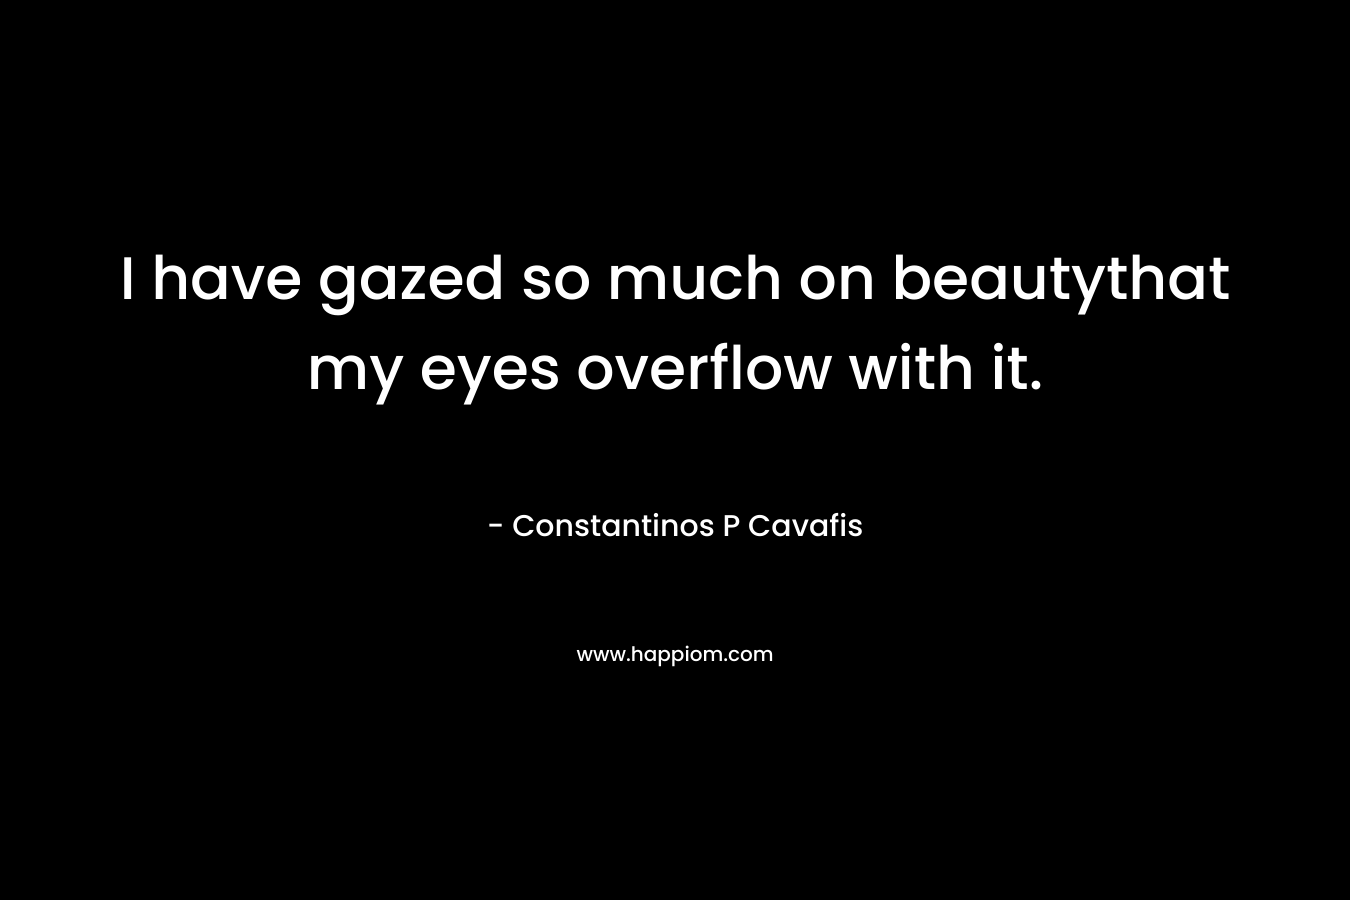 I have gazed so much on beautythat my eyes overflow with it. – Constantinos P Cavafis